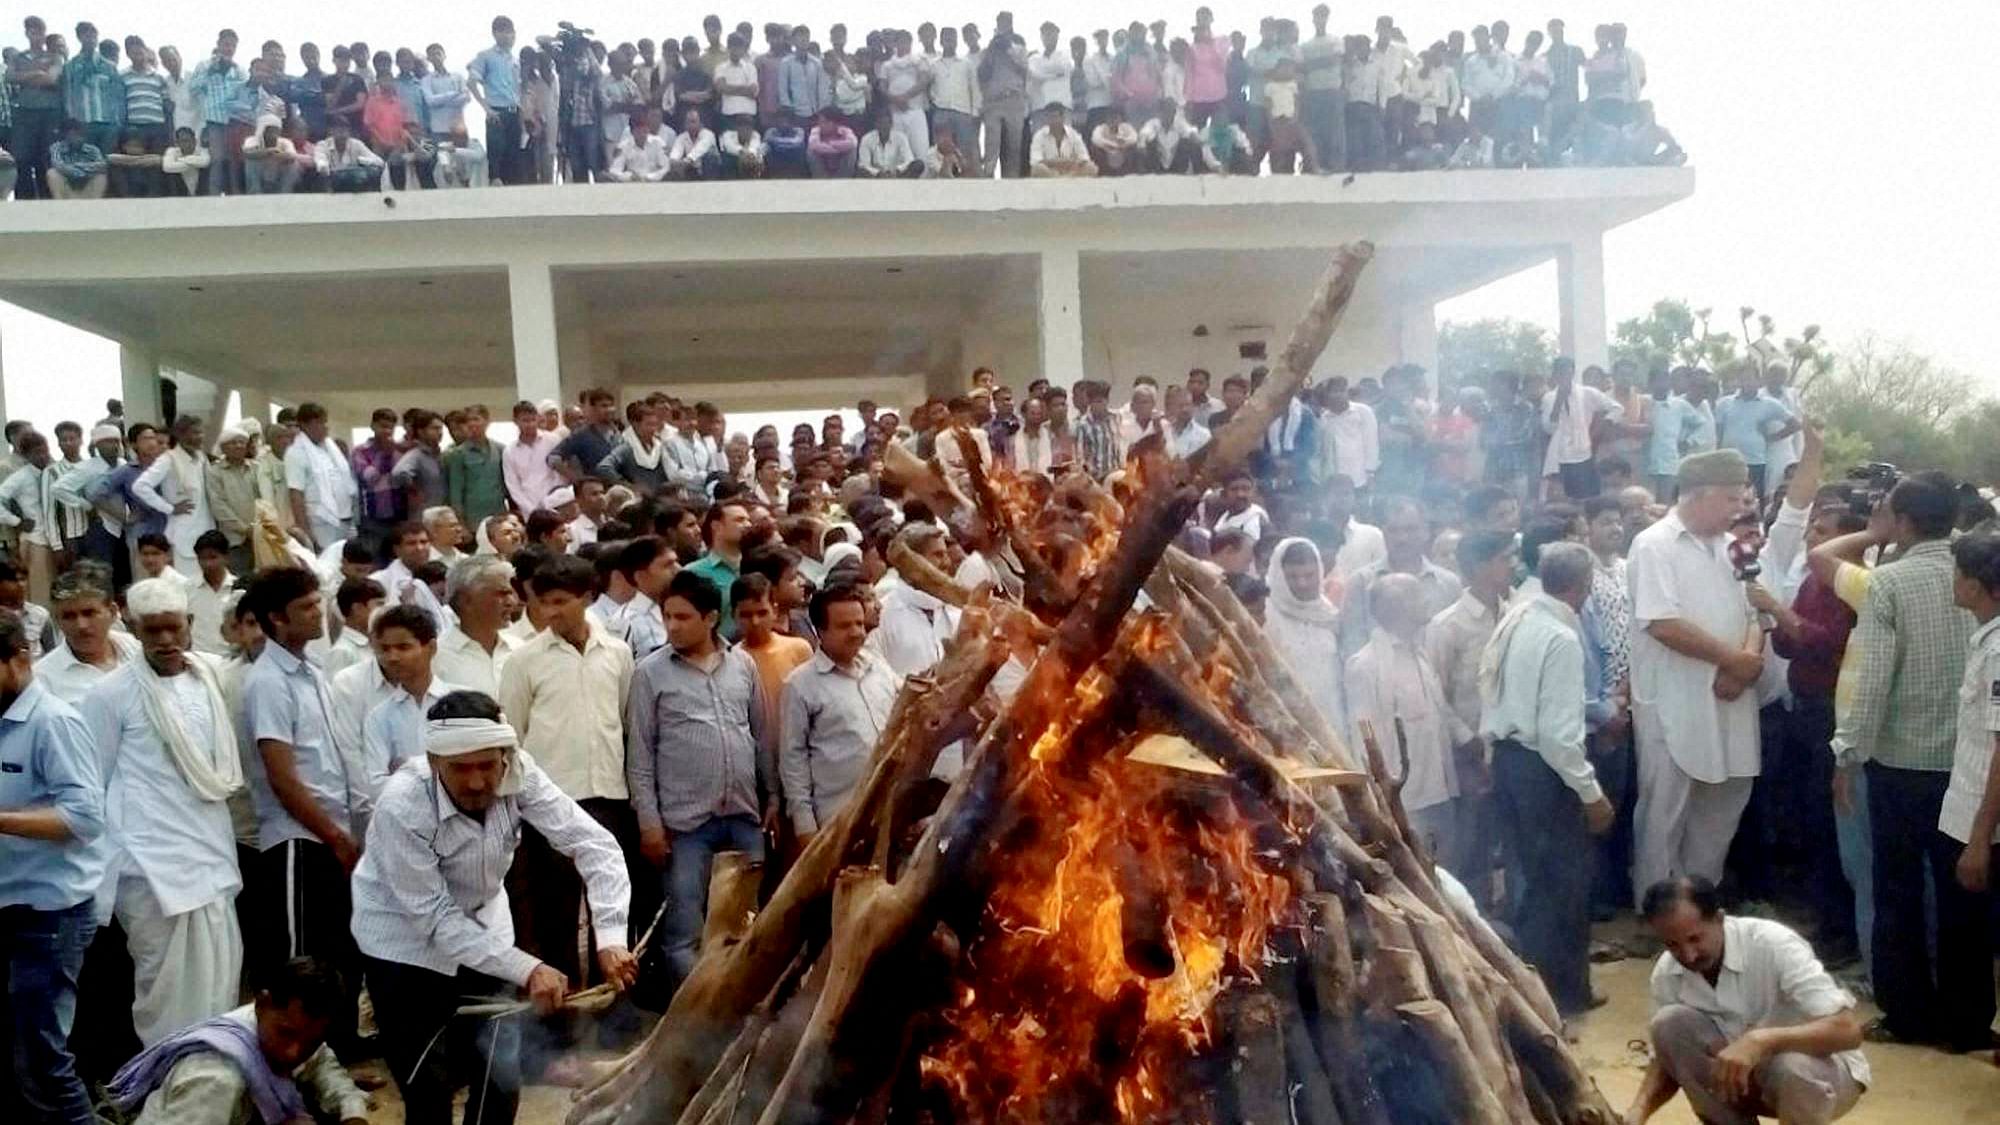     {C}{C}<!--StartFragment-->Farmers gather during cremation of Gajendra Singh in Dausa district, Rajasthan on Thursday. (Photo: PTI){C}{C}<!--EndFragment-->